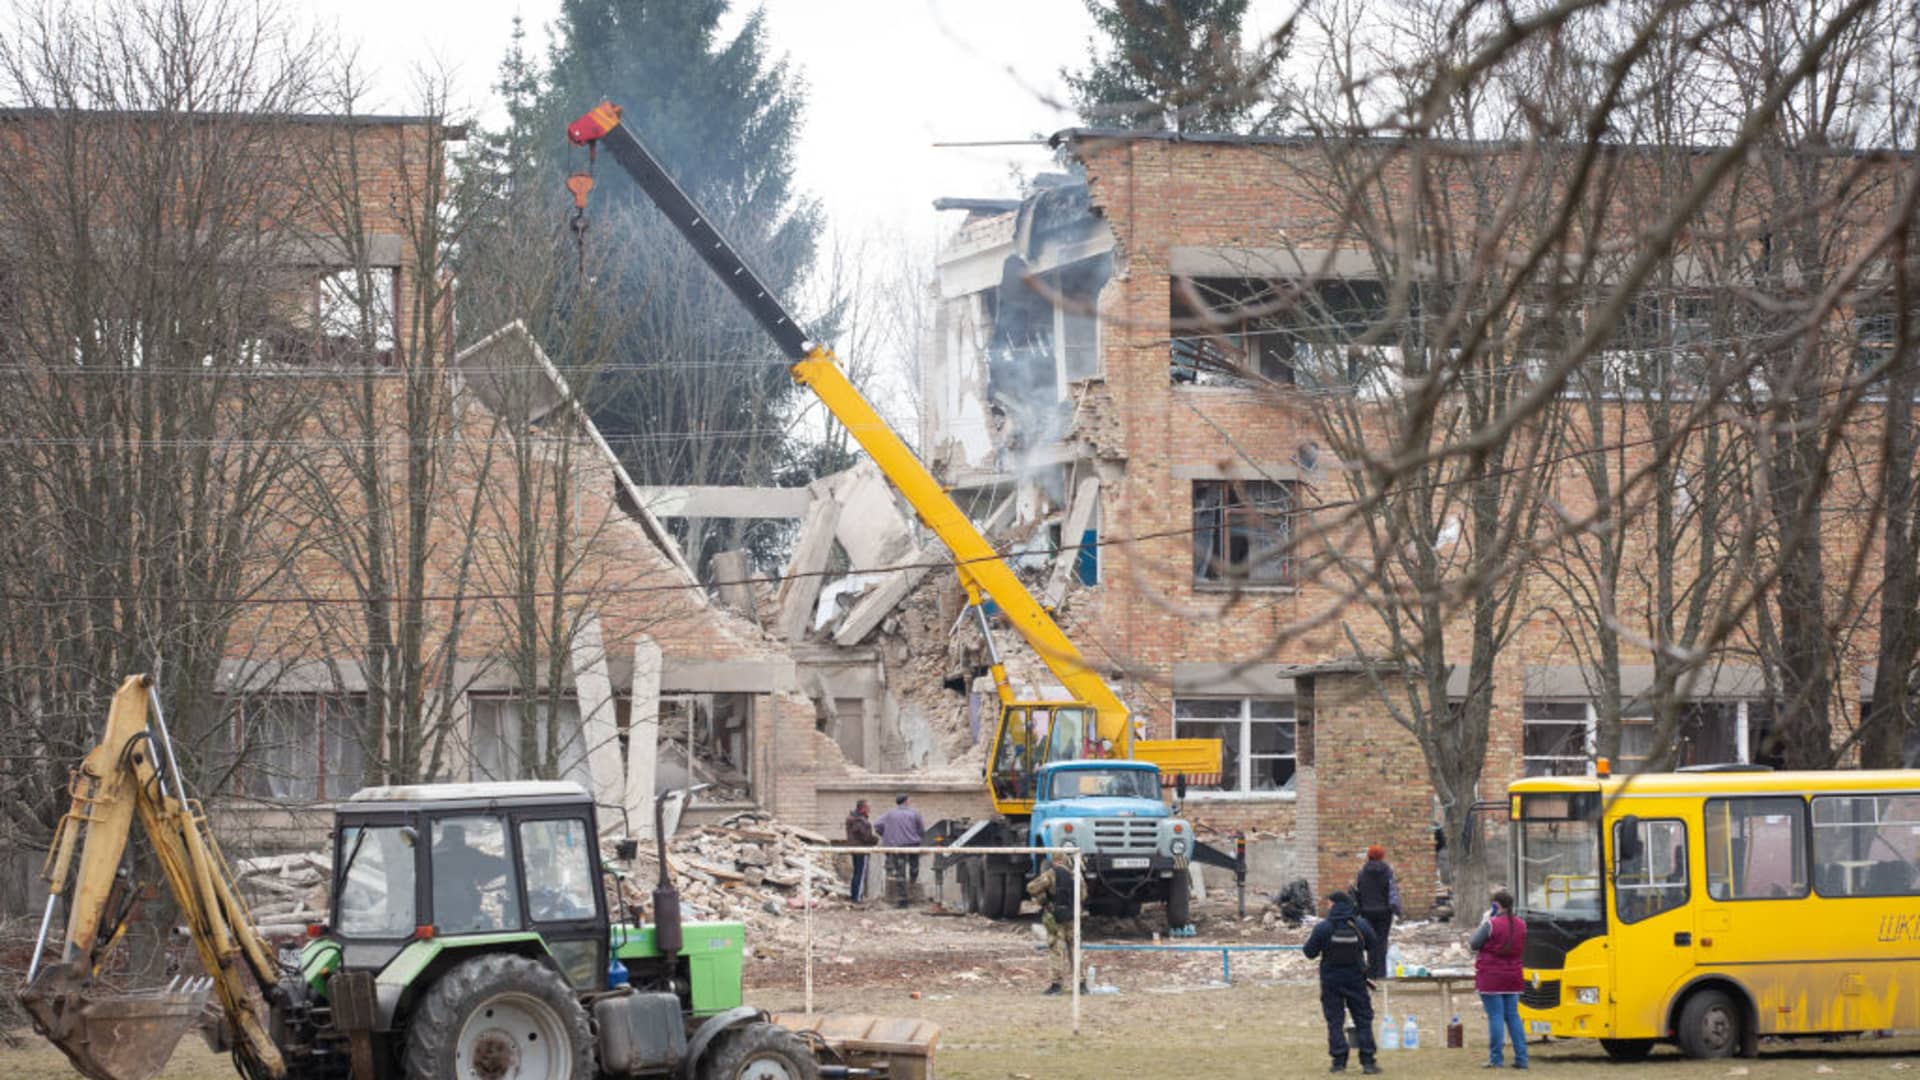 A residential building damaged after Russia conducted a drone attack in the town of Rzhyshchiv in Kyiv, Ukraine, on March 22, 2023.